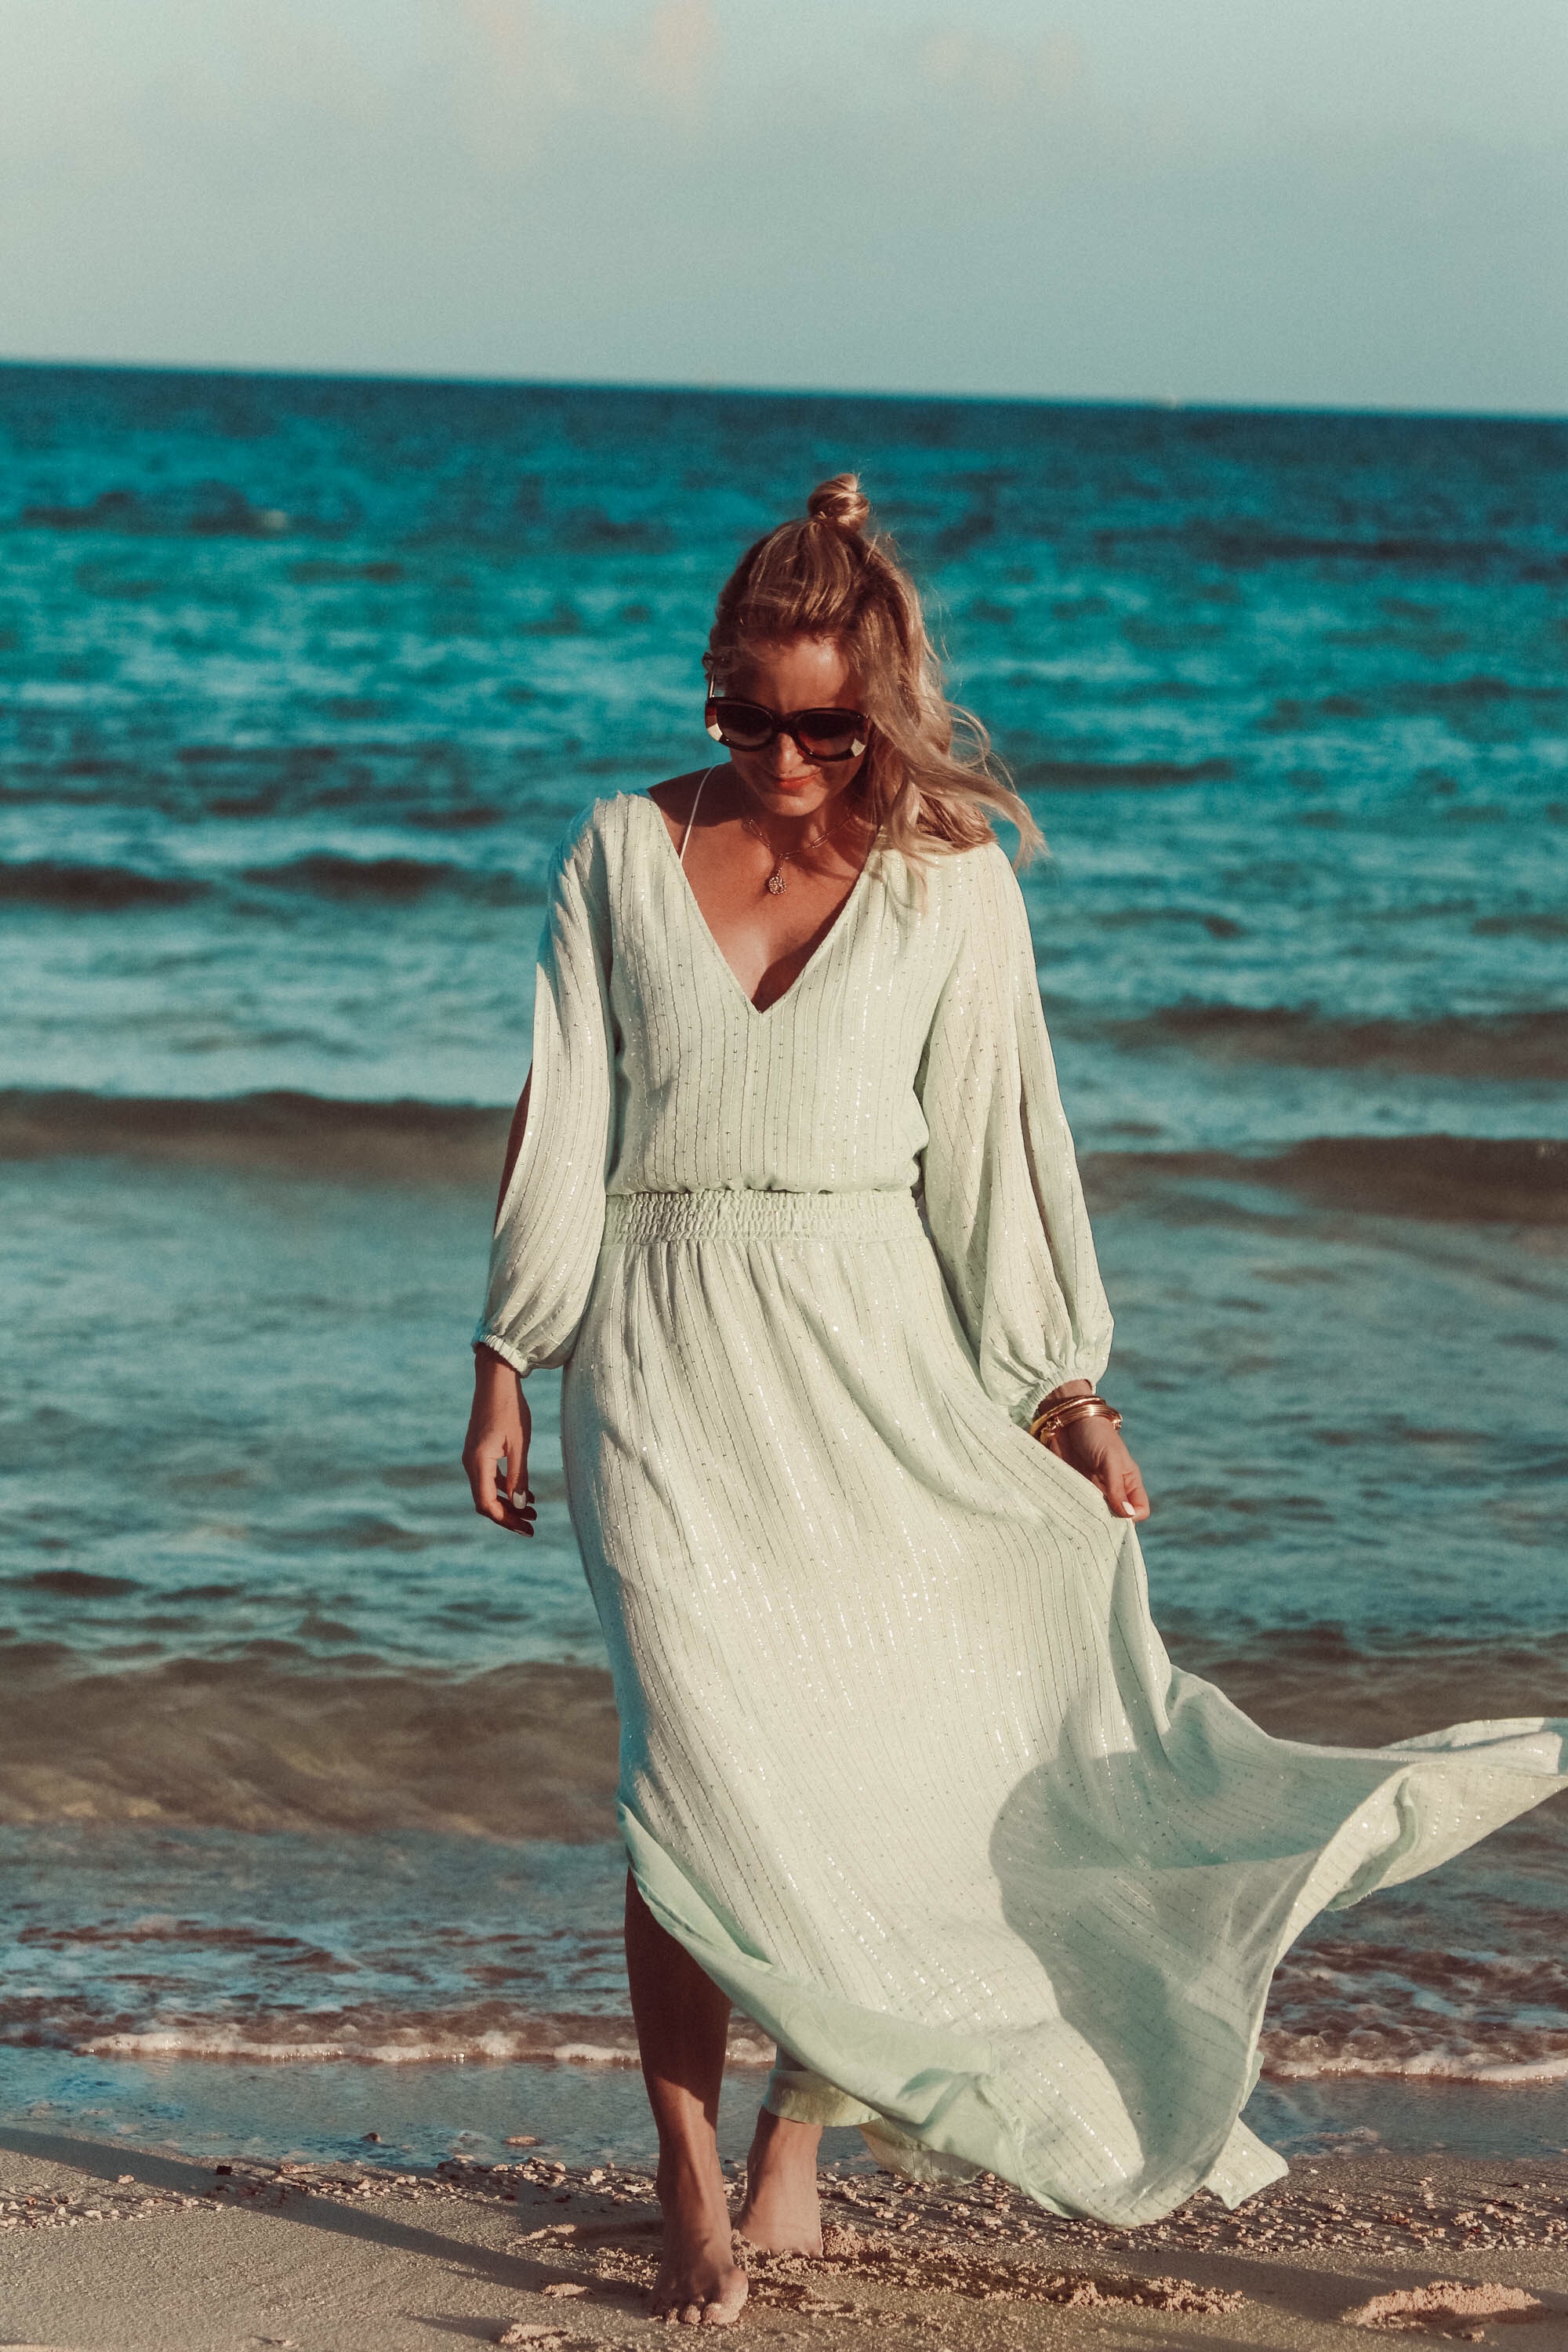 Maxi Dresses For Summer, Fashion blogger Erin Busbee of Busbee Style wearing a blue sequin maxi dress by Sundress, Chloe brown rainbow sunglasses, and Aligheri gold ritual necklace walking on the beach in the Bahamas,